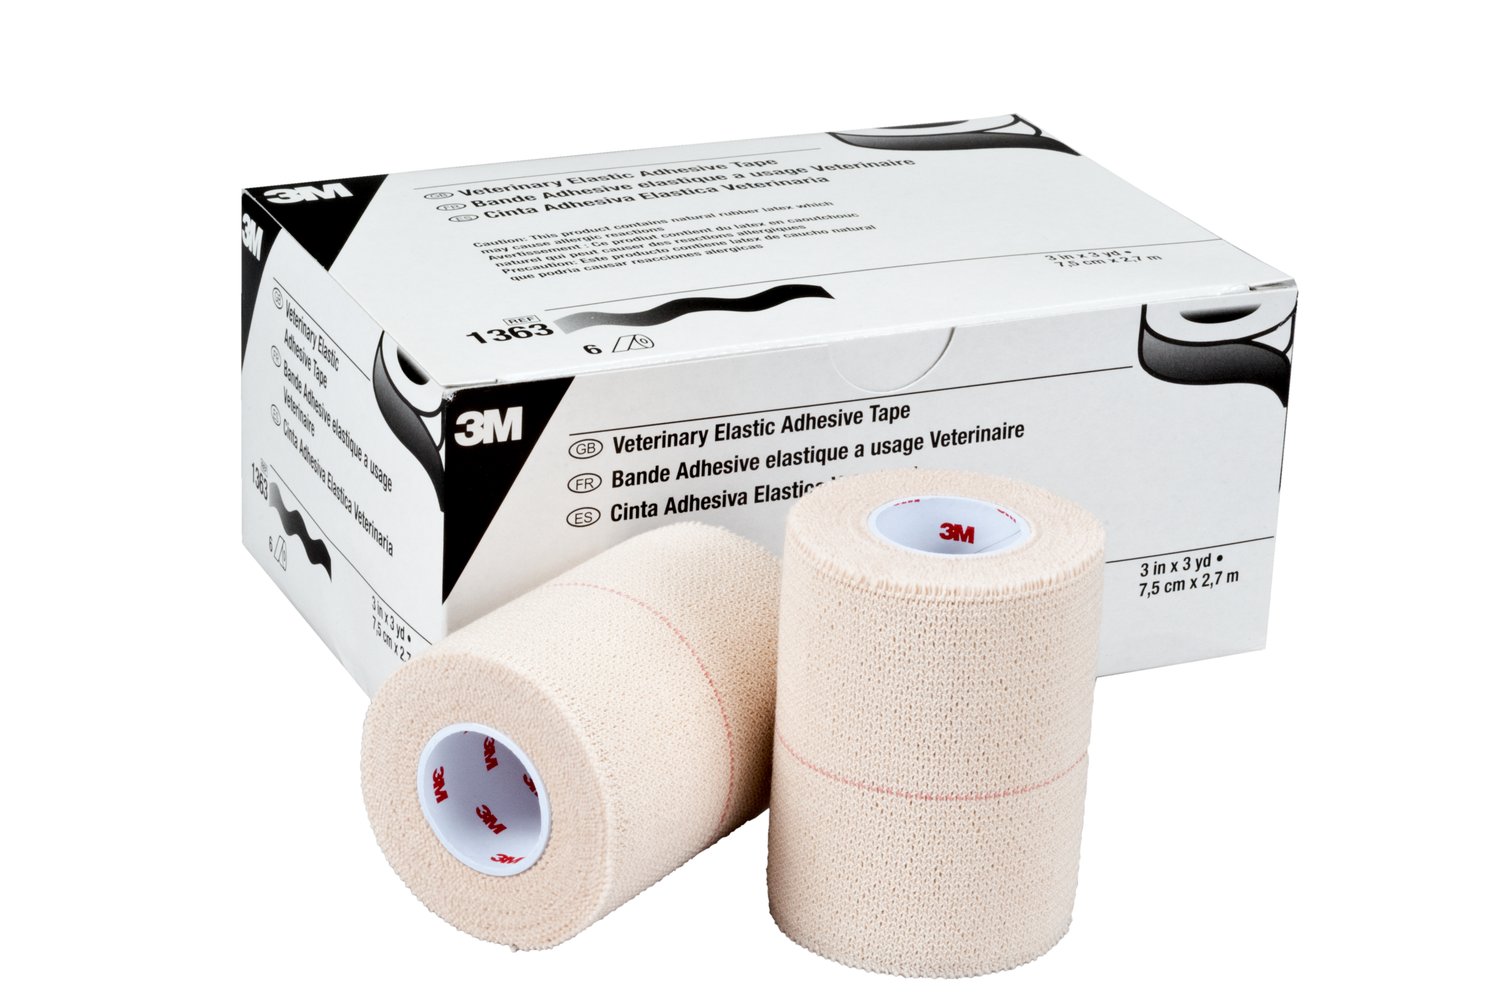 7000108577 - 3M Veterinary Elastic Adhesive Tape, 1363, 3" x 3 yd Relaxed